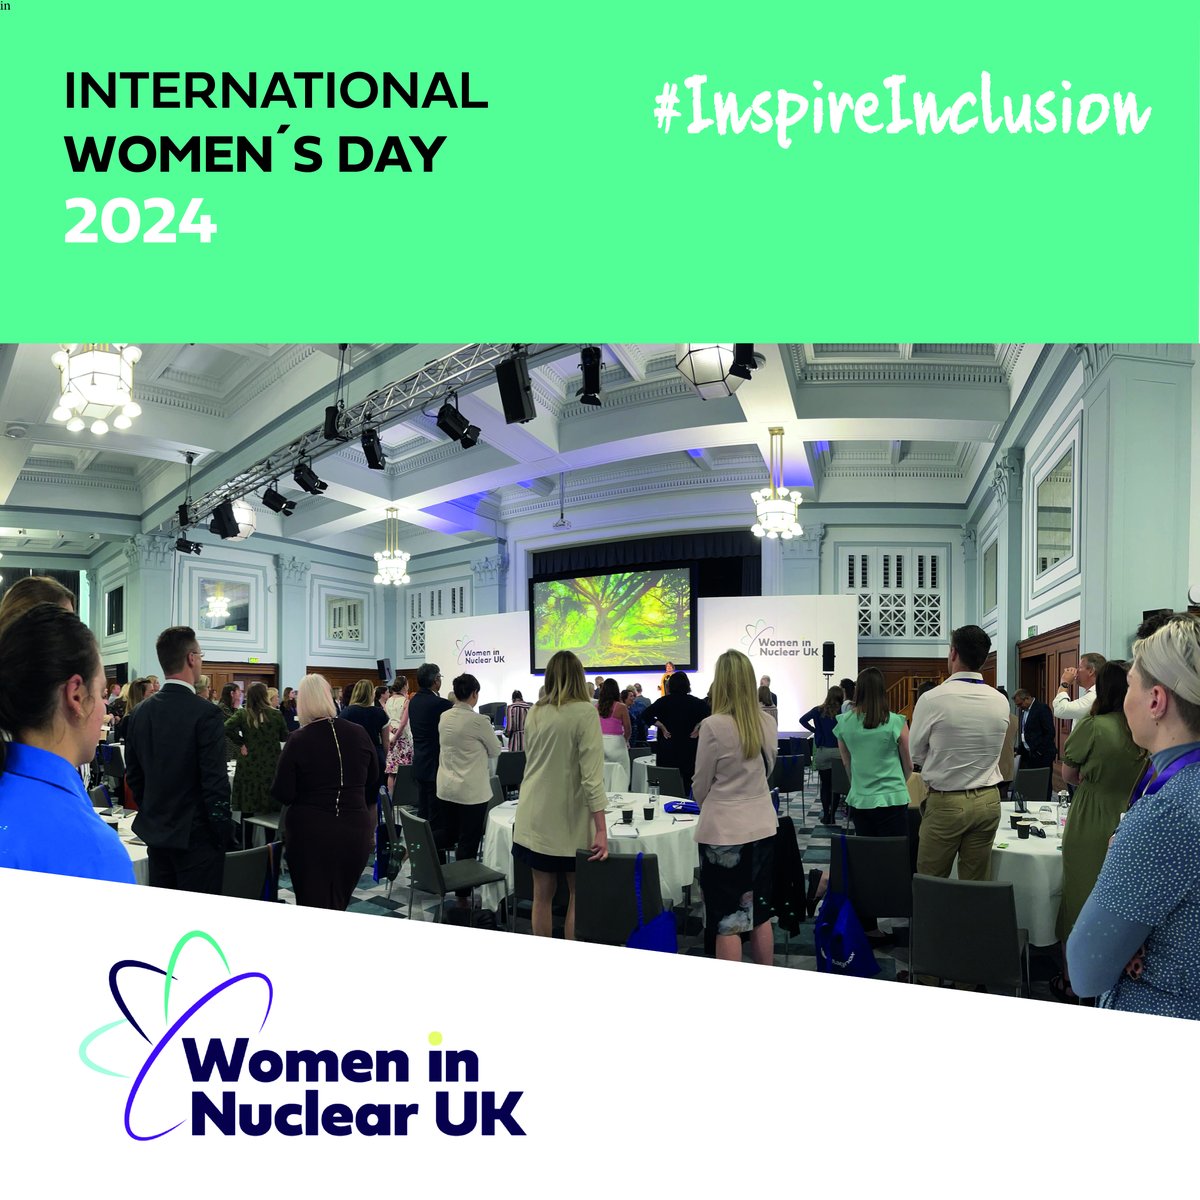 Today we celebrate progress in #inclusion & #diversity. But we don't limit ourselves to just one day. We work to #inspireinclusion across the #nuclear industry everyday, with our mission to address #genderbalance. Find out how you can support us here: winuk.org.uk